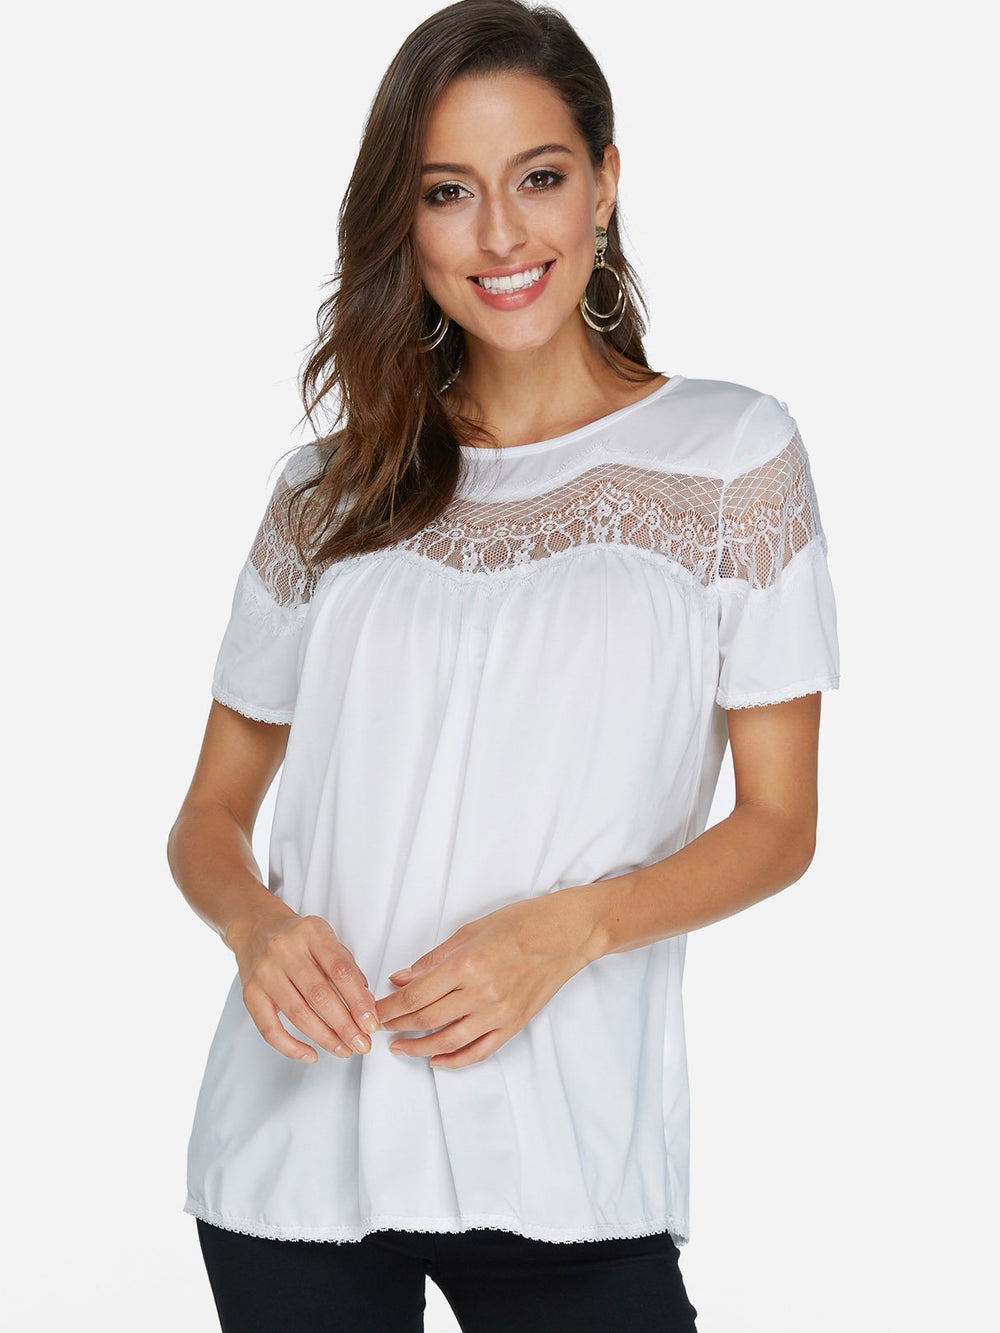 Round Neck Lace Short Sleeve White Top